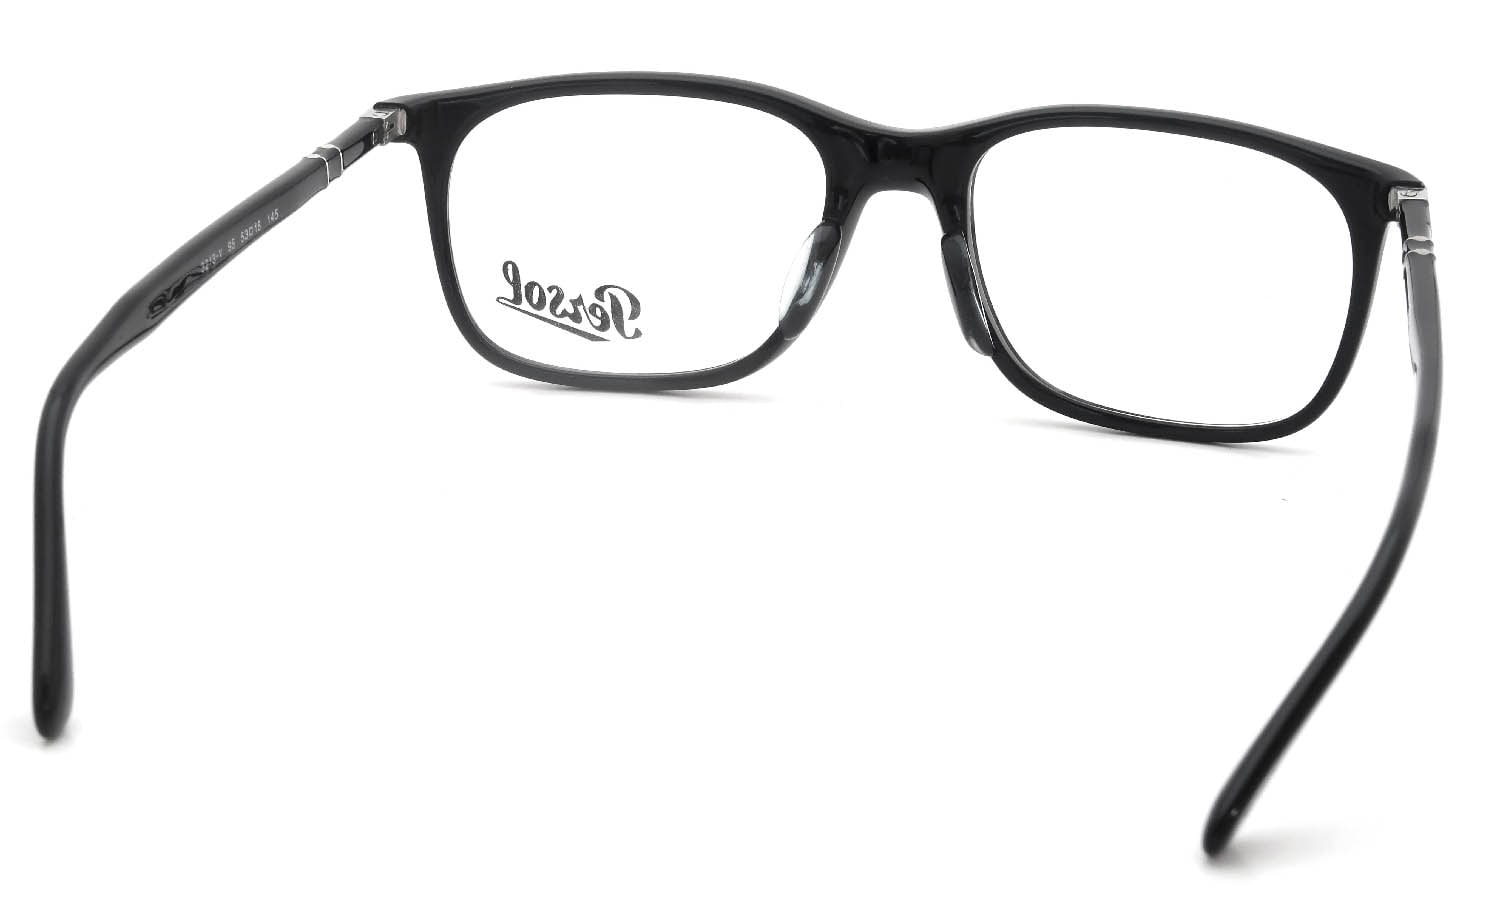 Persol 3213-V 95 53size